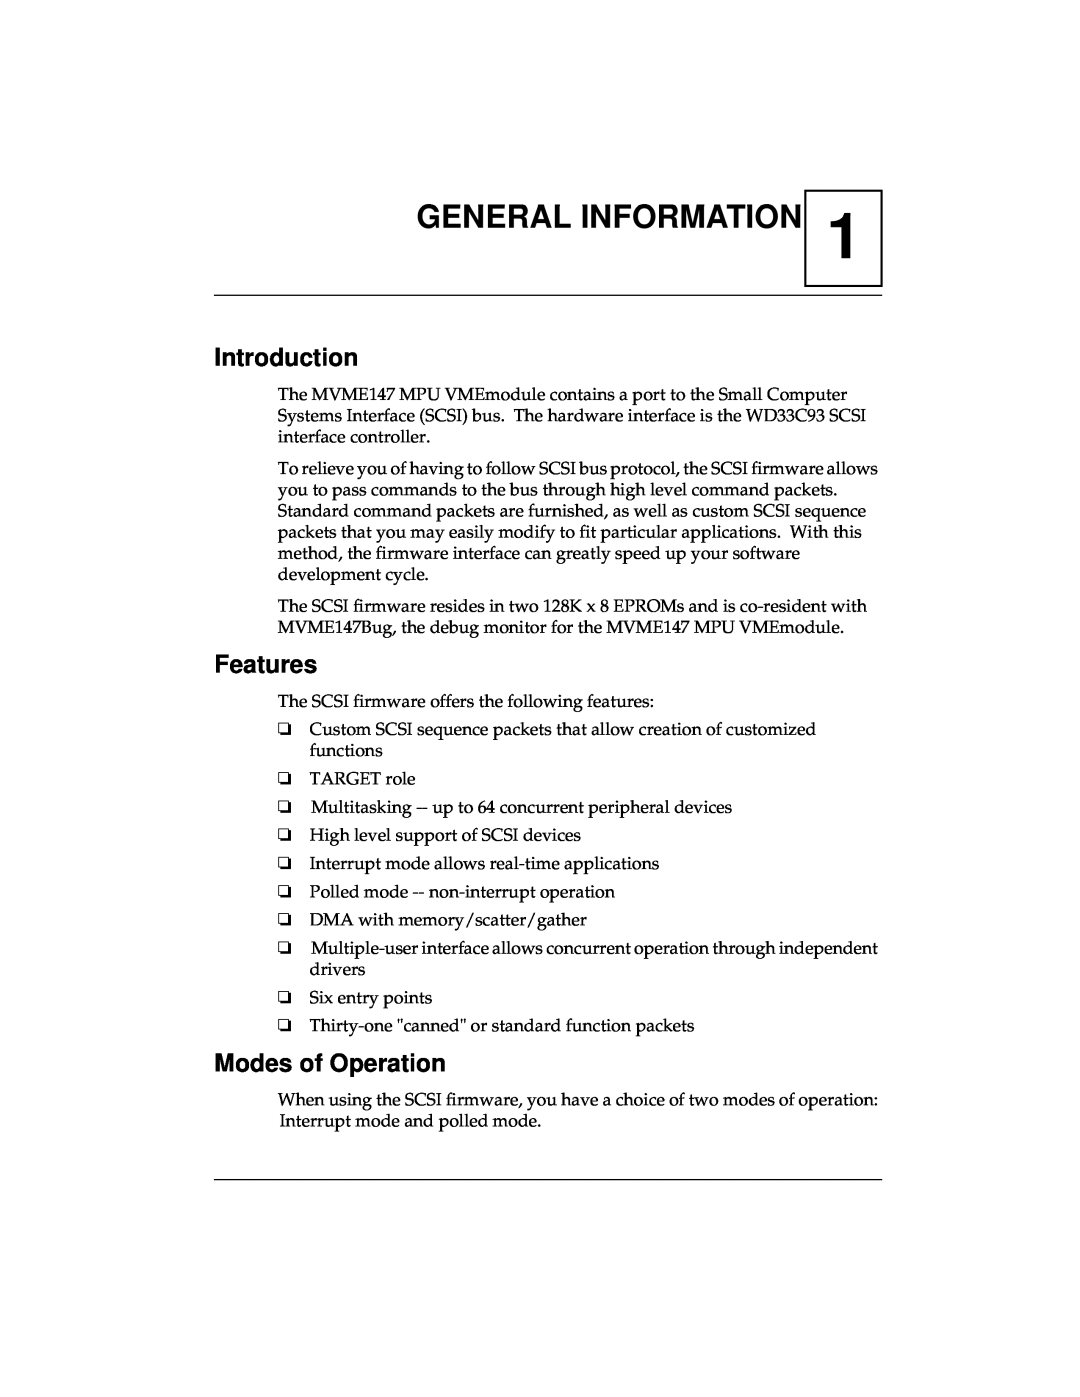 Emerson MVME147 manual General Information, Introduction, Features, Modes of Operation 